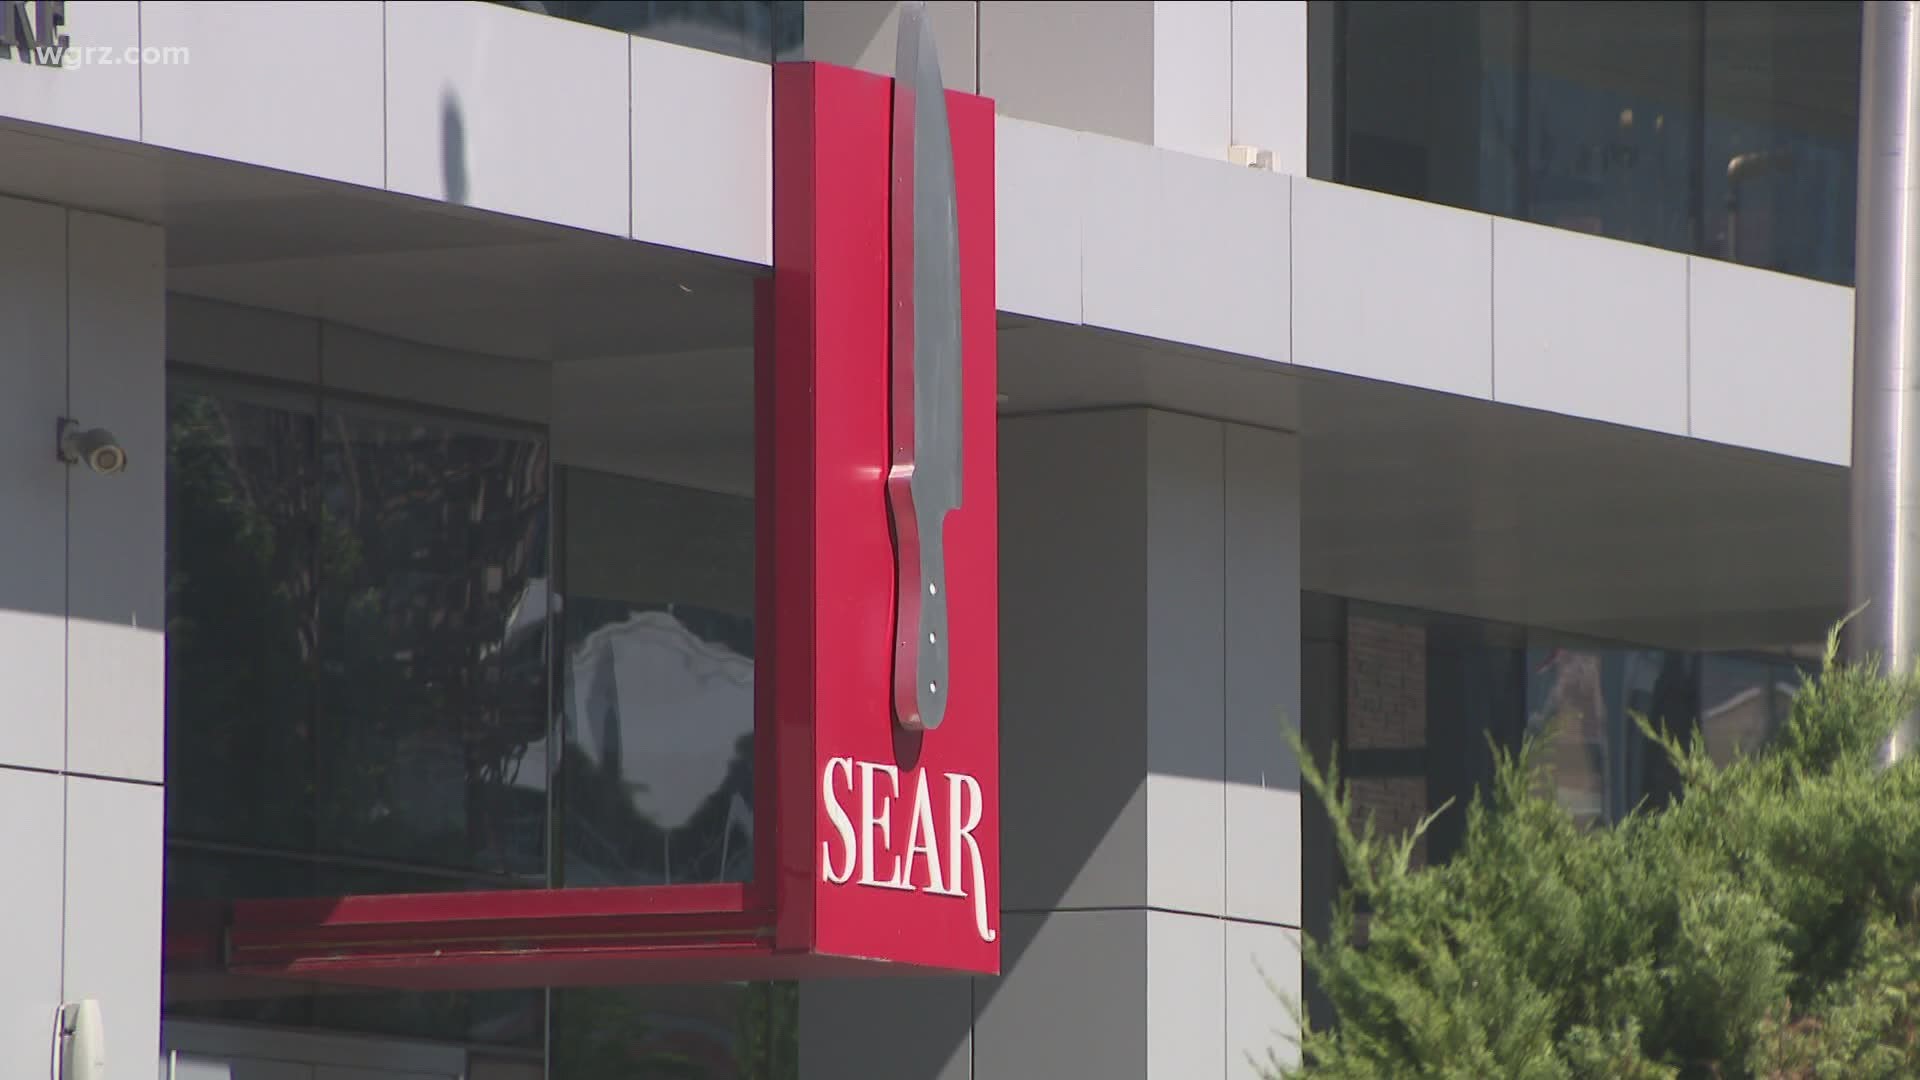 Sear Restaurant in the Avant Building is accusing Uniland Development Co., which owns the building, of a 'litany of bad business dealings.'